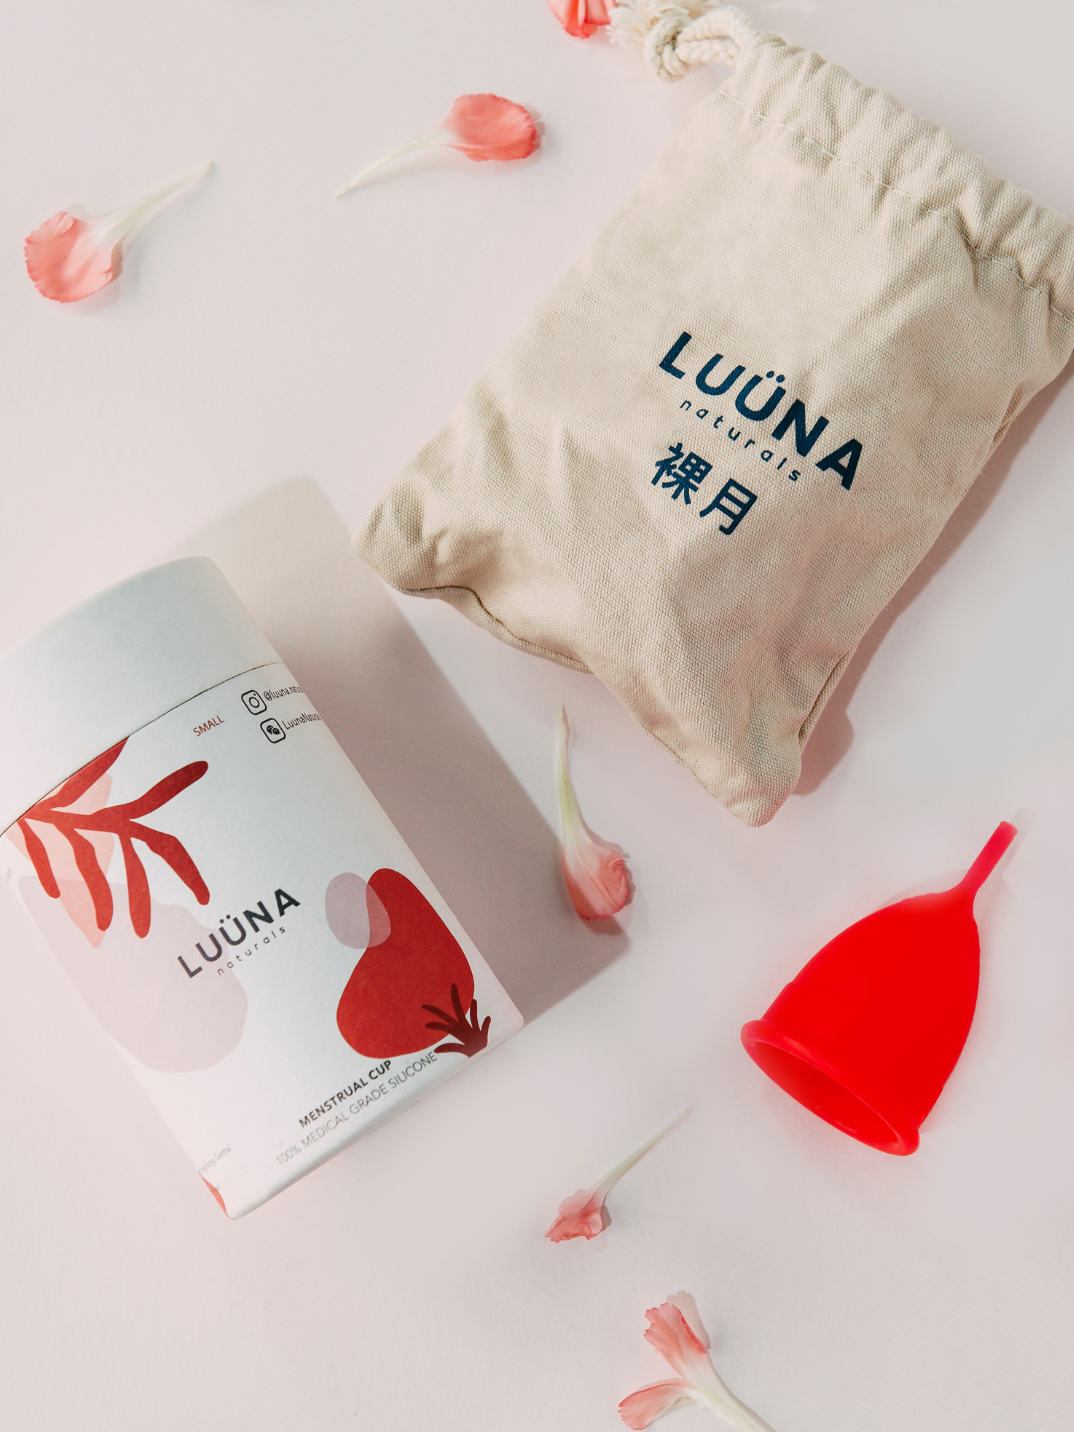 period cup low waste period care LUUNA Naturals comes in 2 sizes: small and large